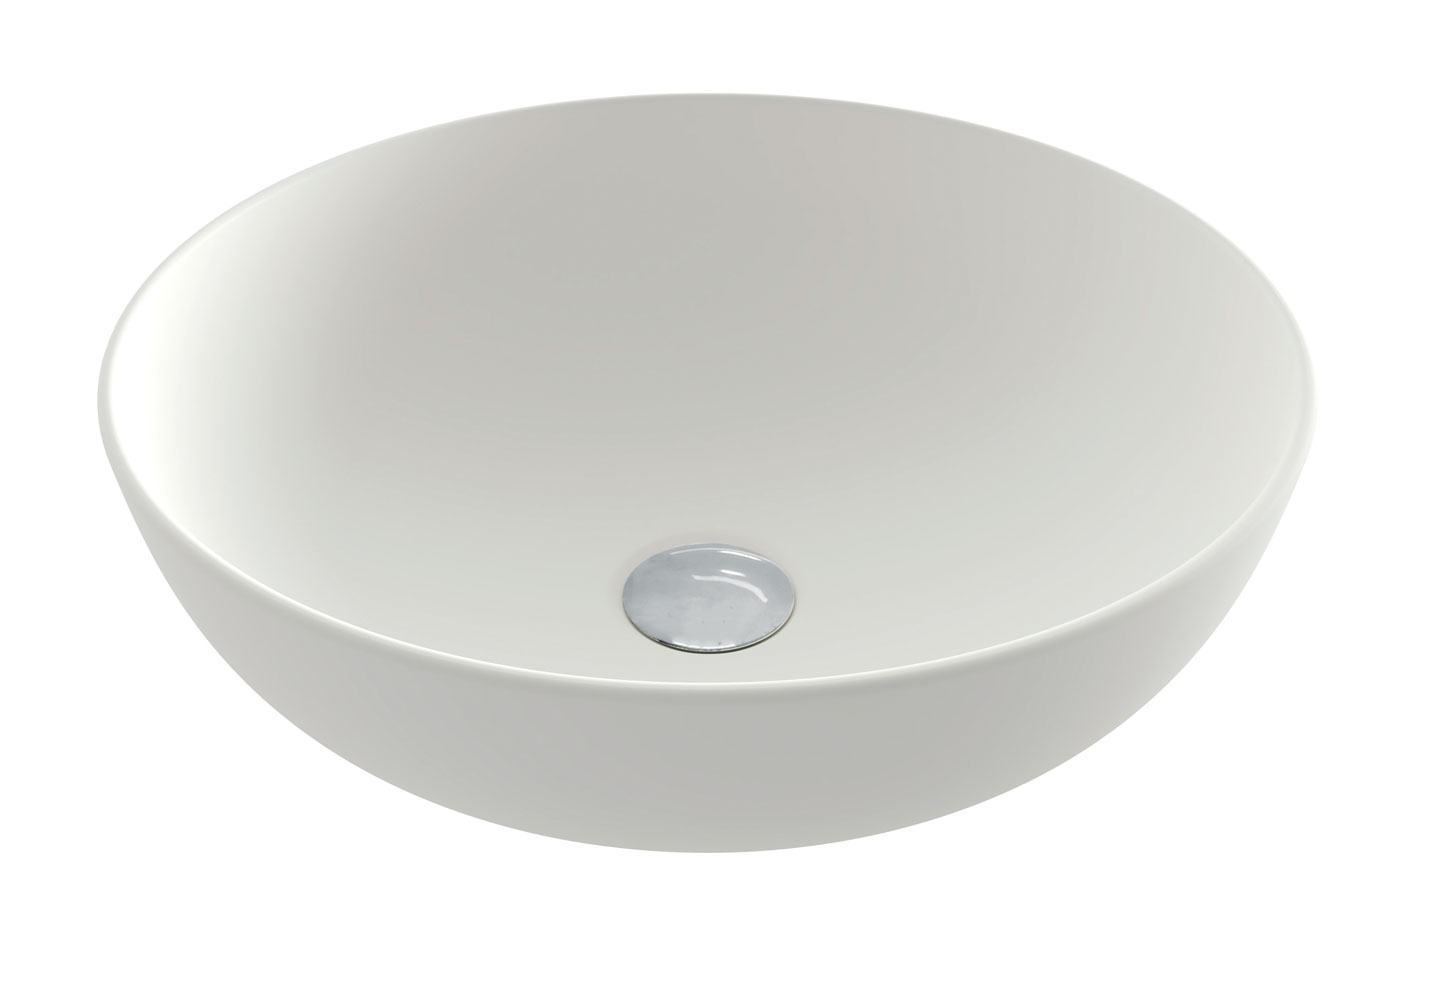 This beautiful thin-rimmed basin features an organic design to suit any modern coastal bathroom. This basin is available in a range of finishes that perfectly complement any custom vanity with stone